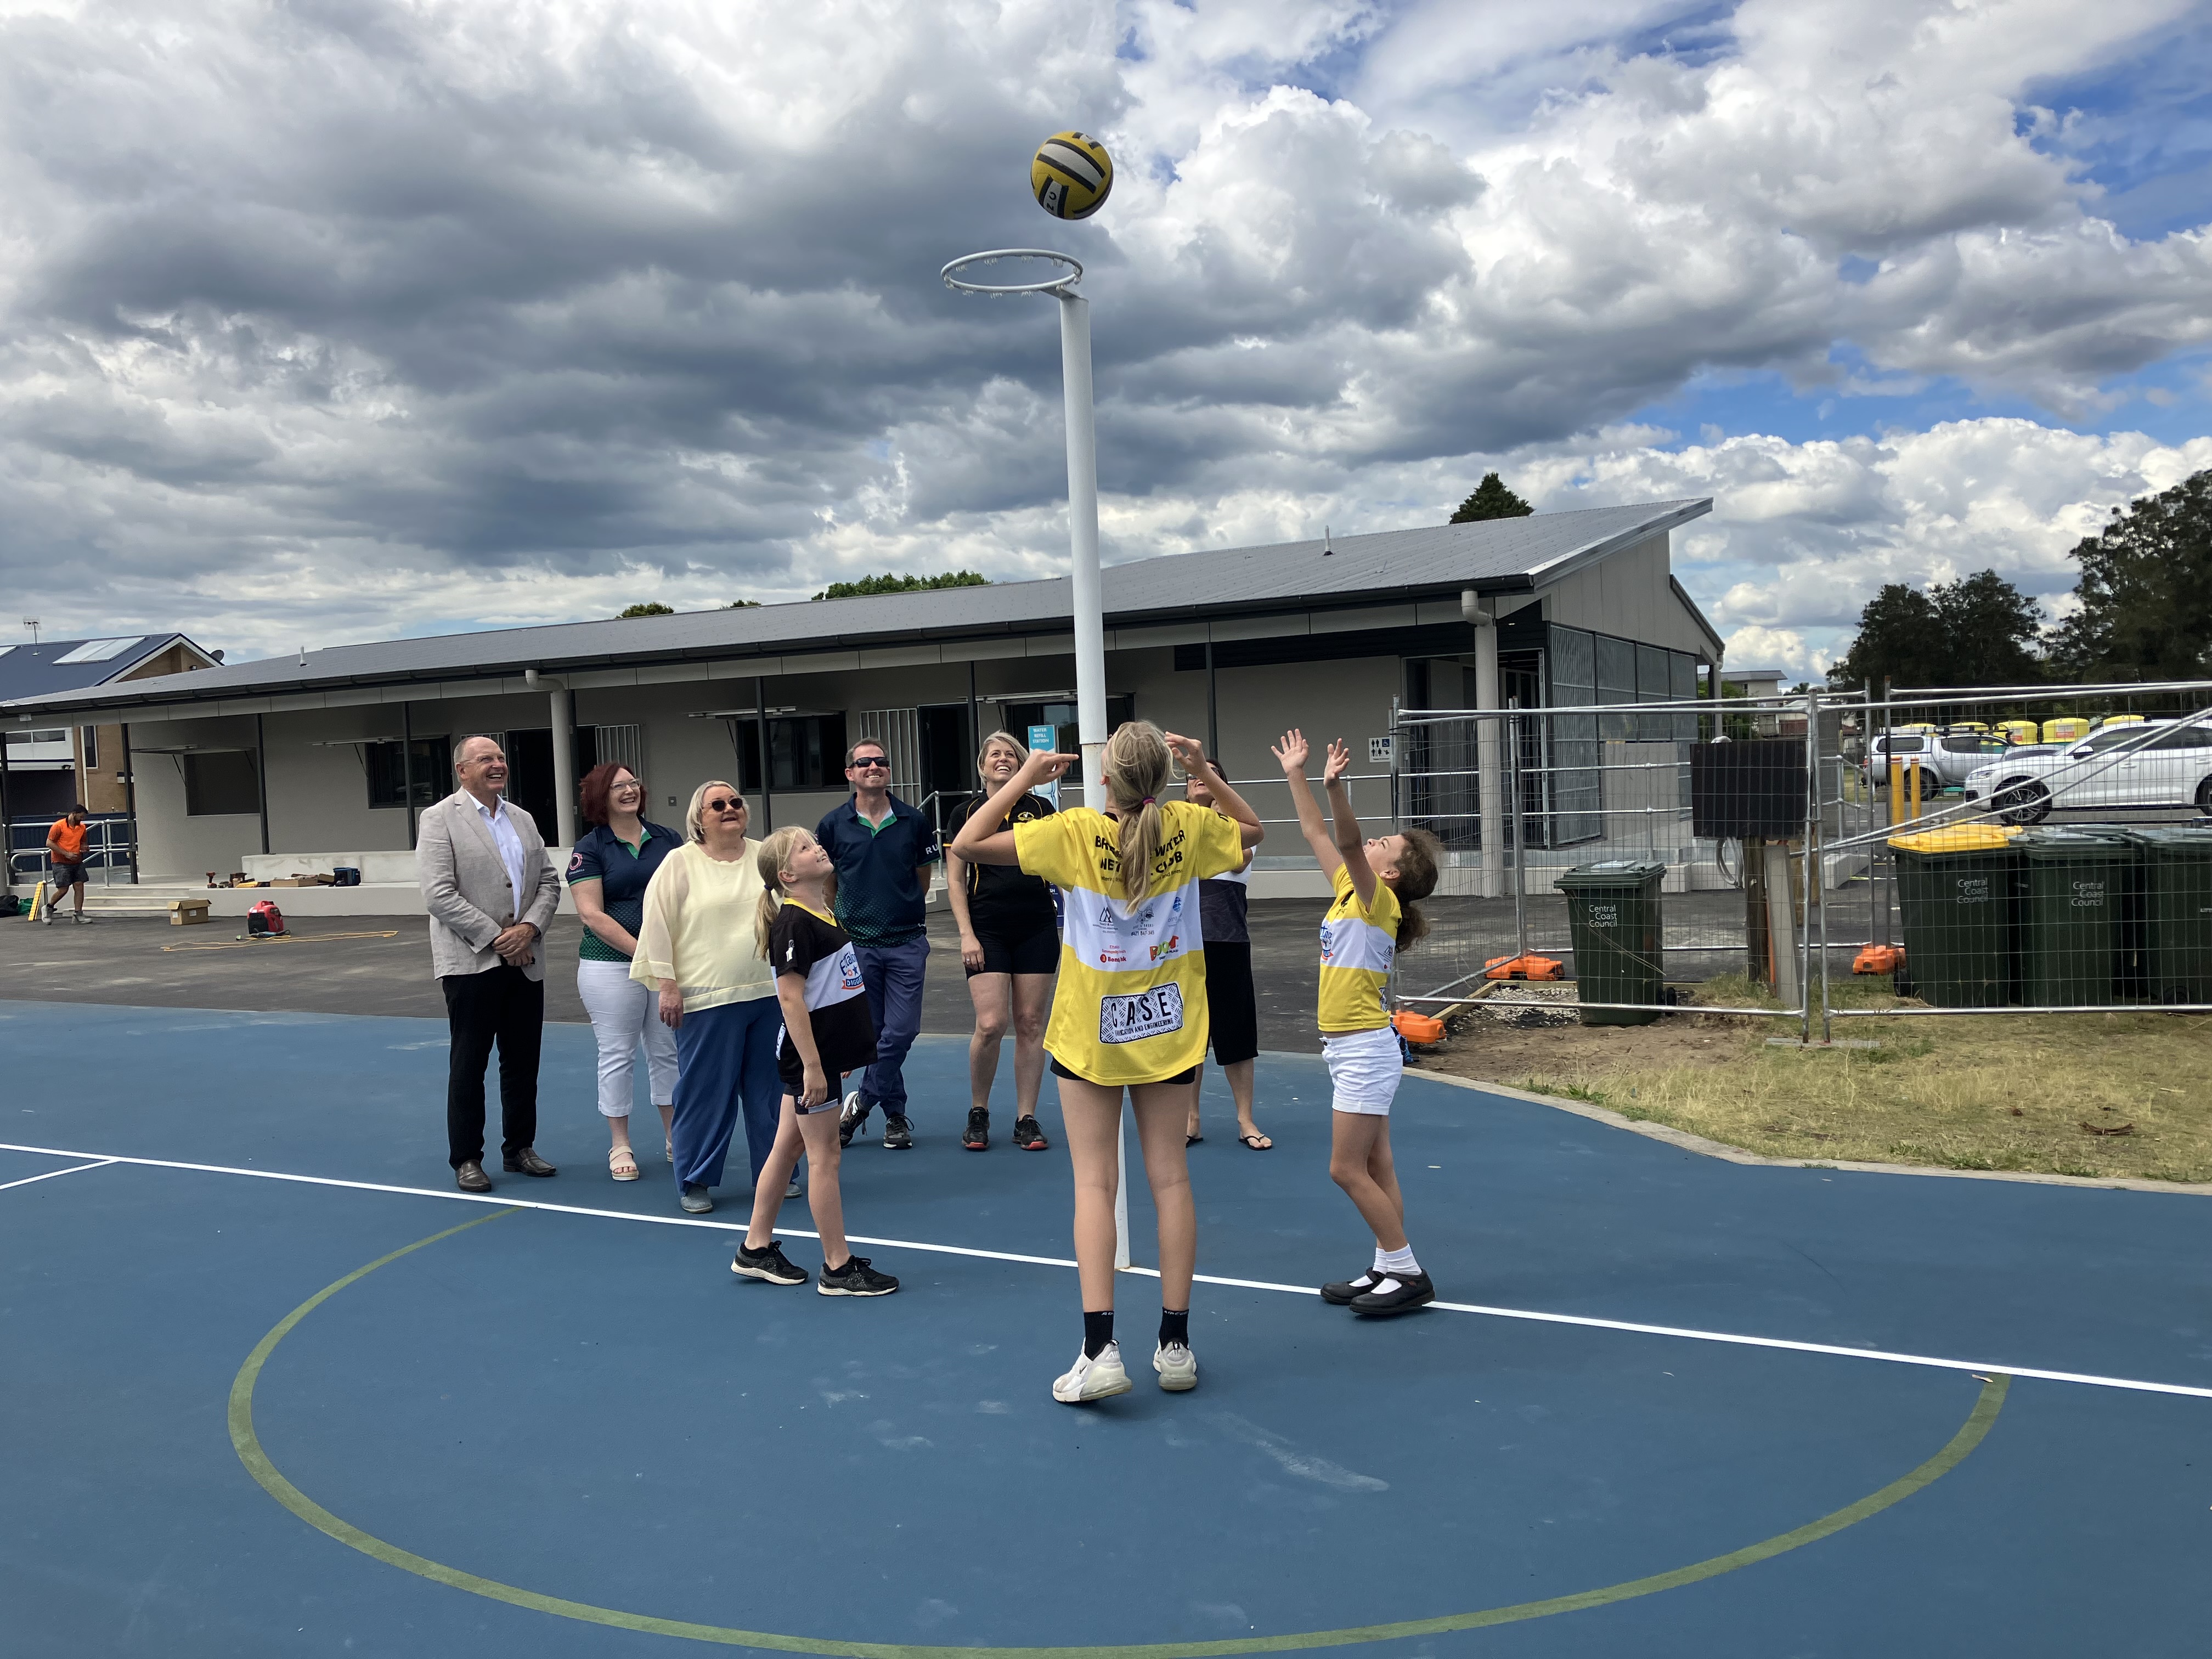 Girls playing netball with adults watching 